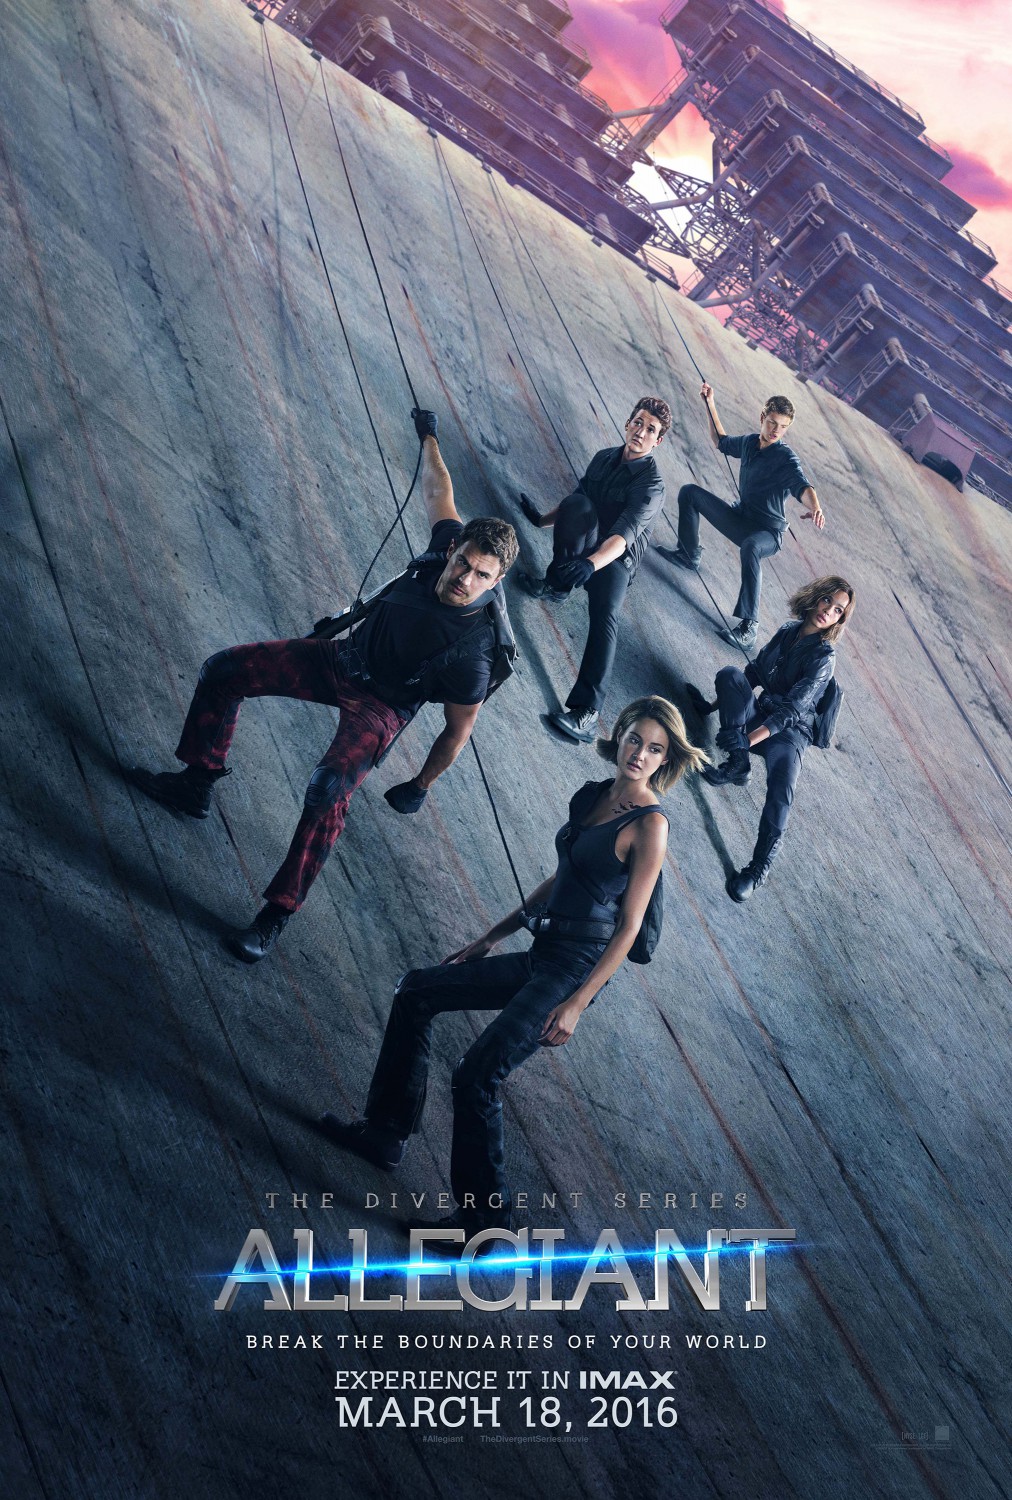 Extra Large Movie Poster Image for The Divergent Series: Allegiant (#4 of 20)